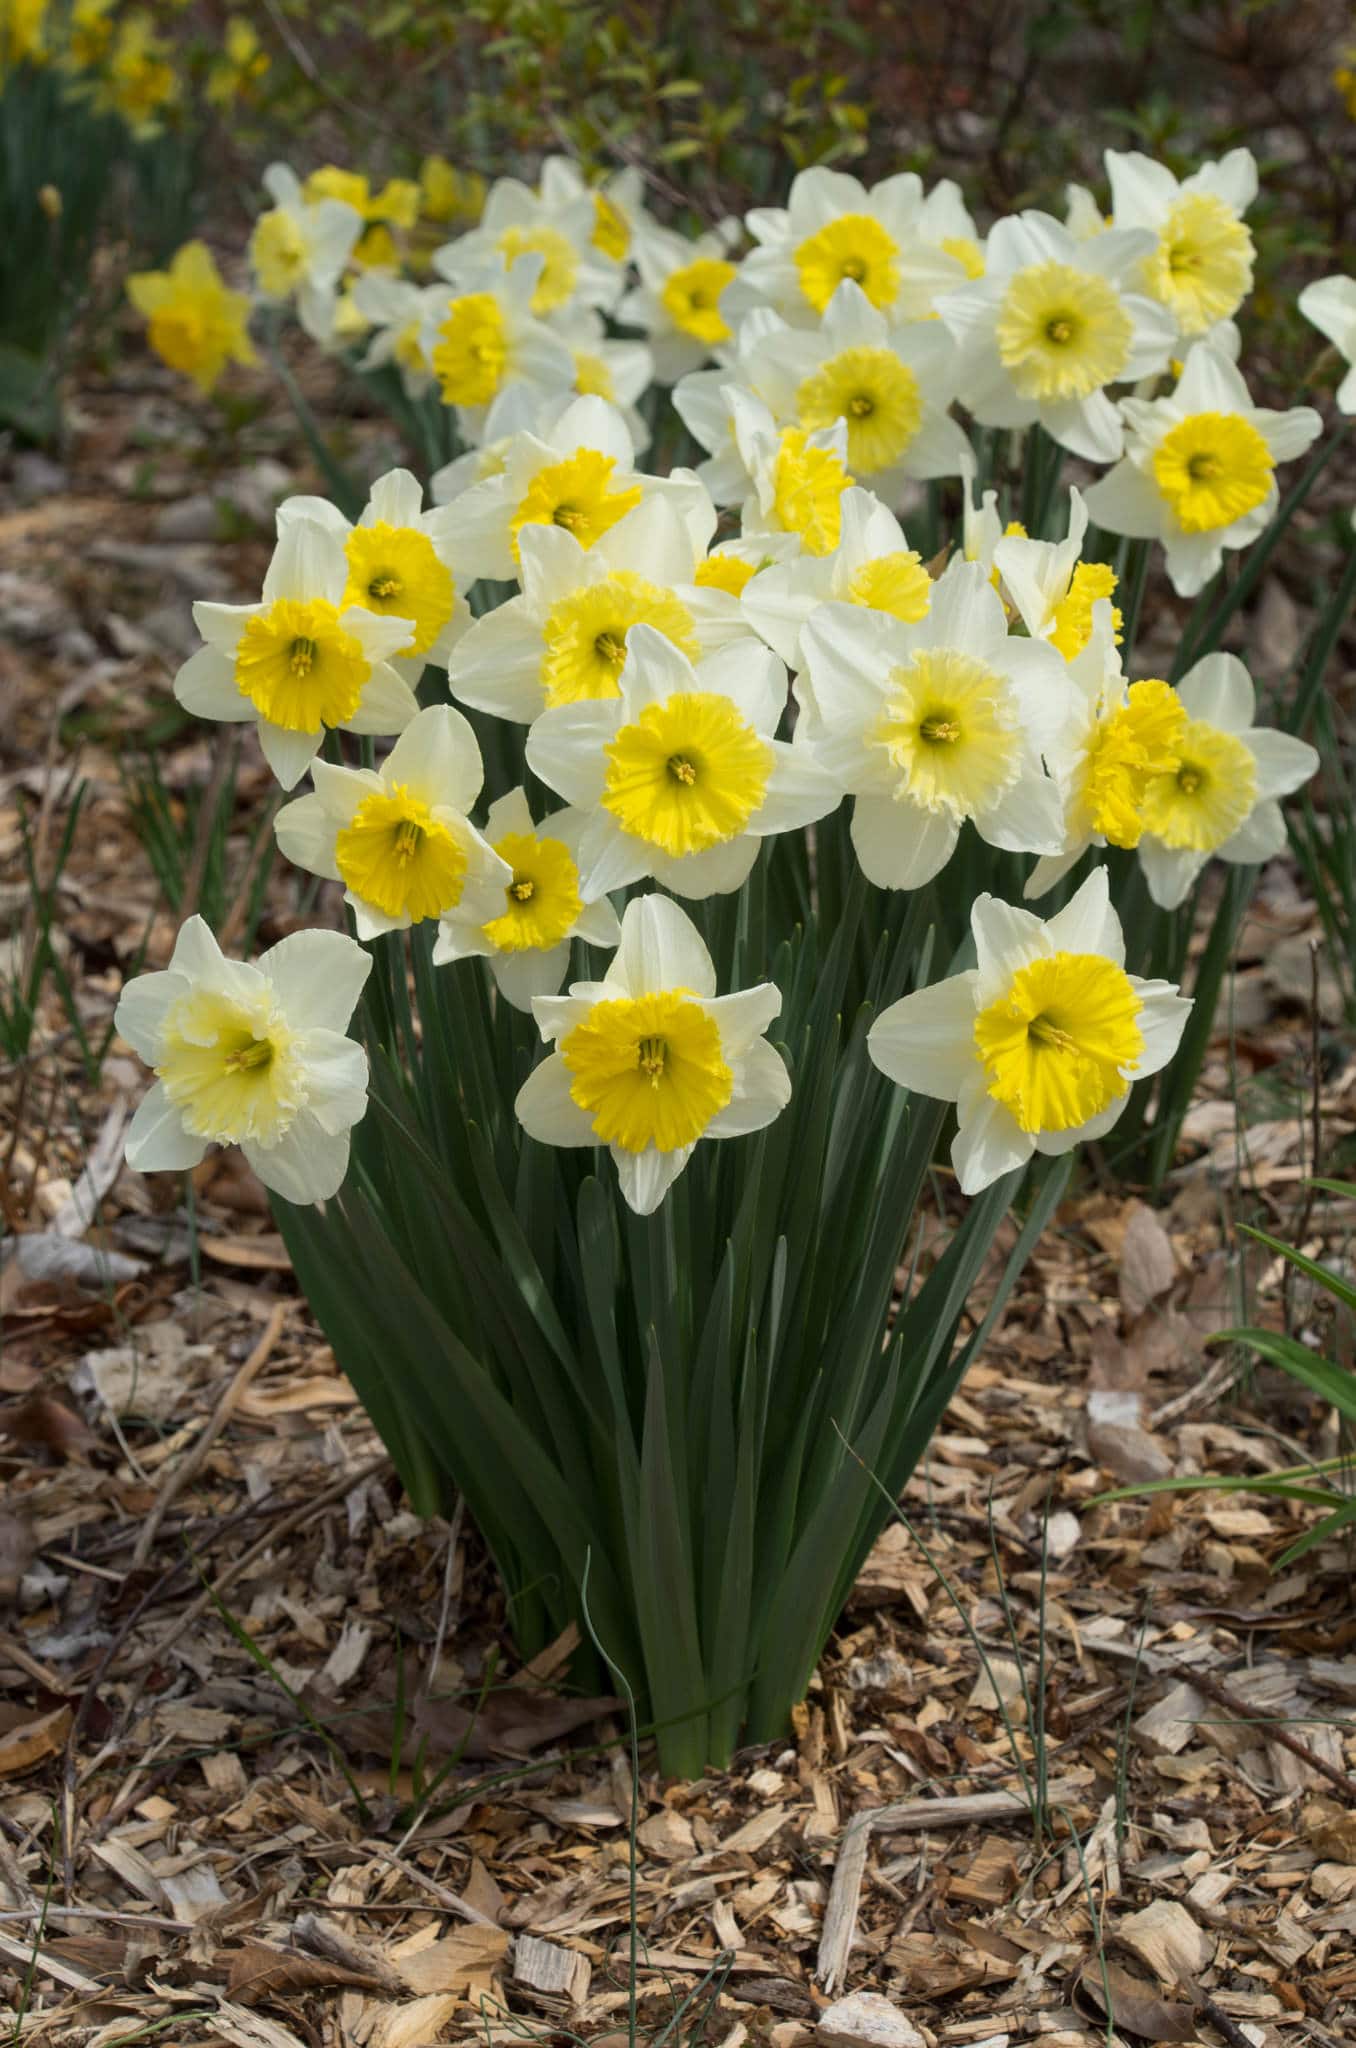 Daffodil Bulbs | Item # 3040 Ice Follies | For Sale - Colorblends®